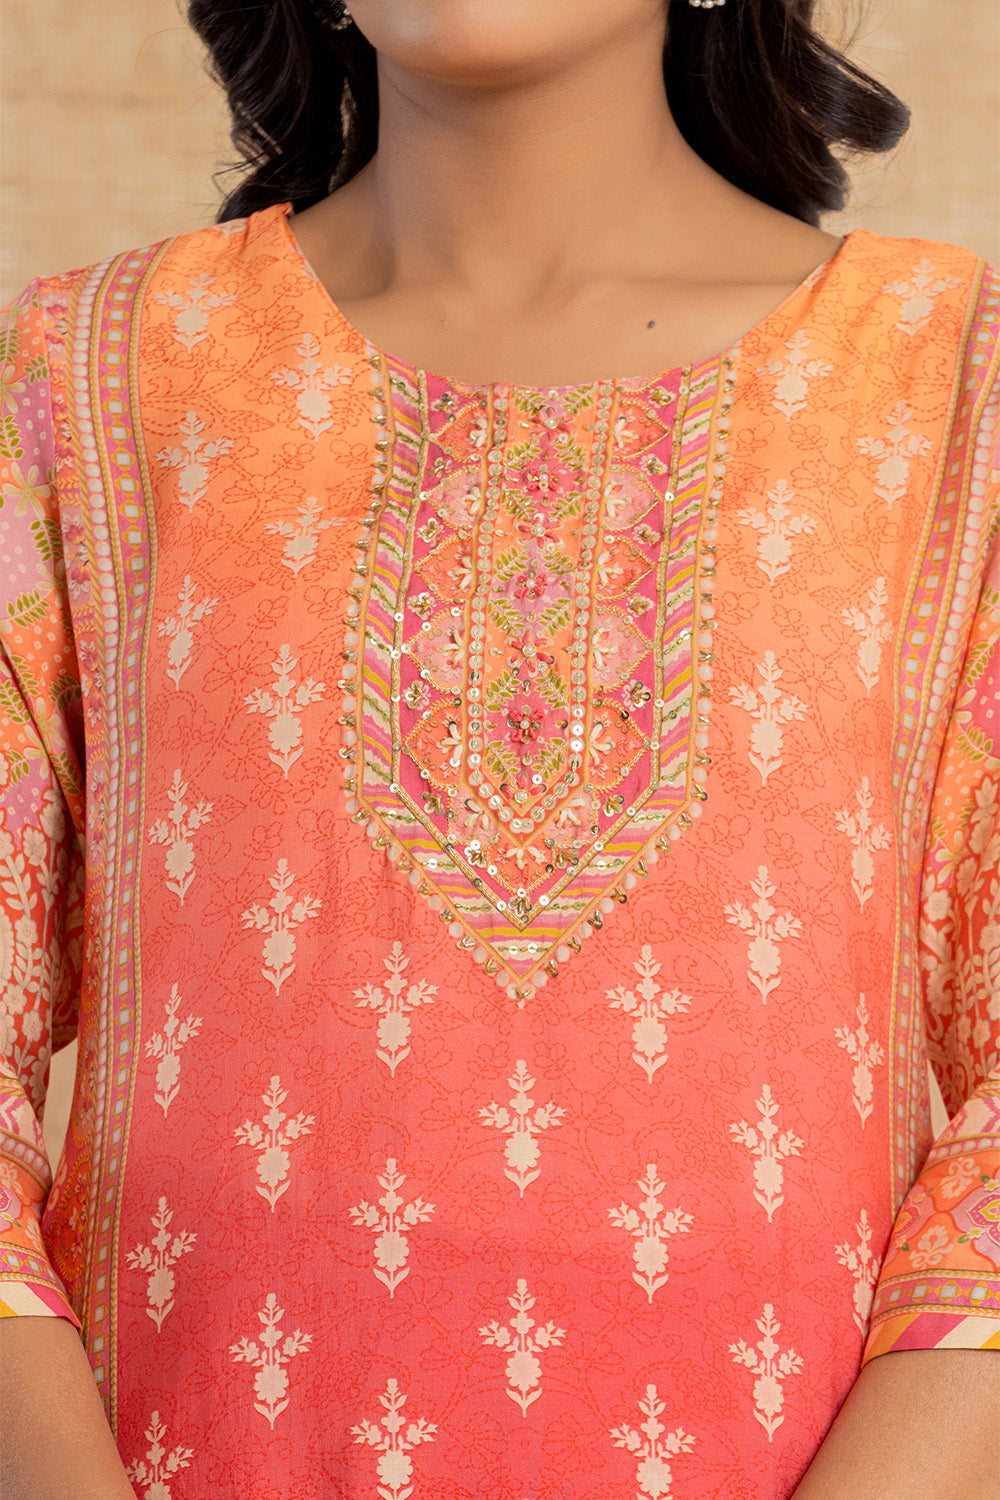 Peach Color Printed Muslin Straight Suit